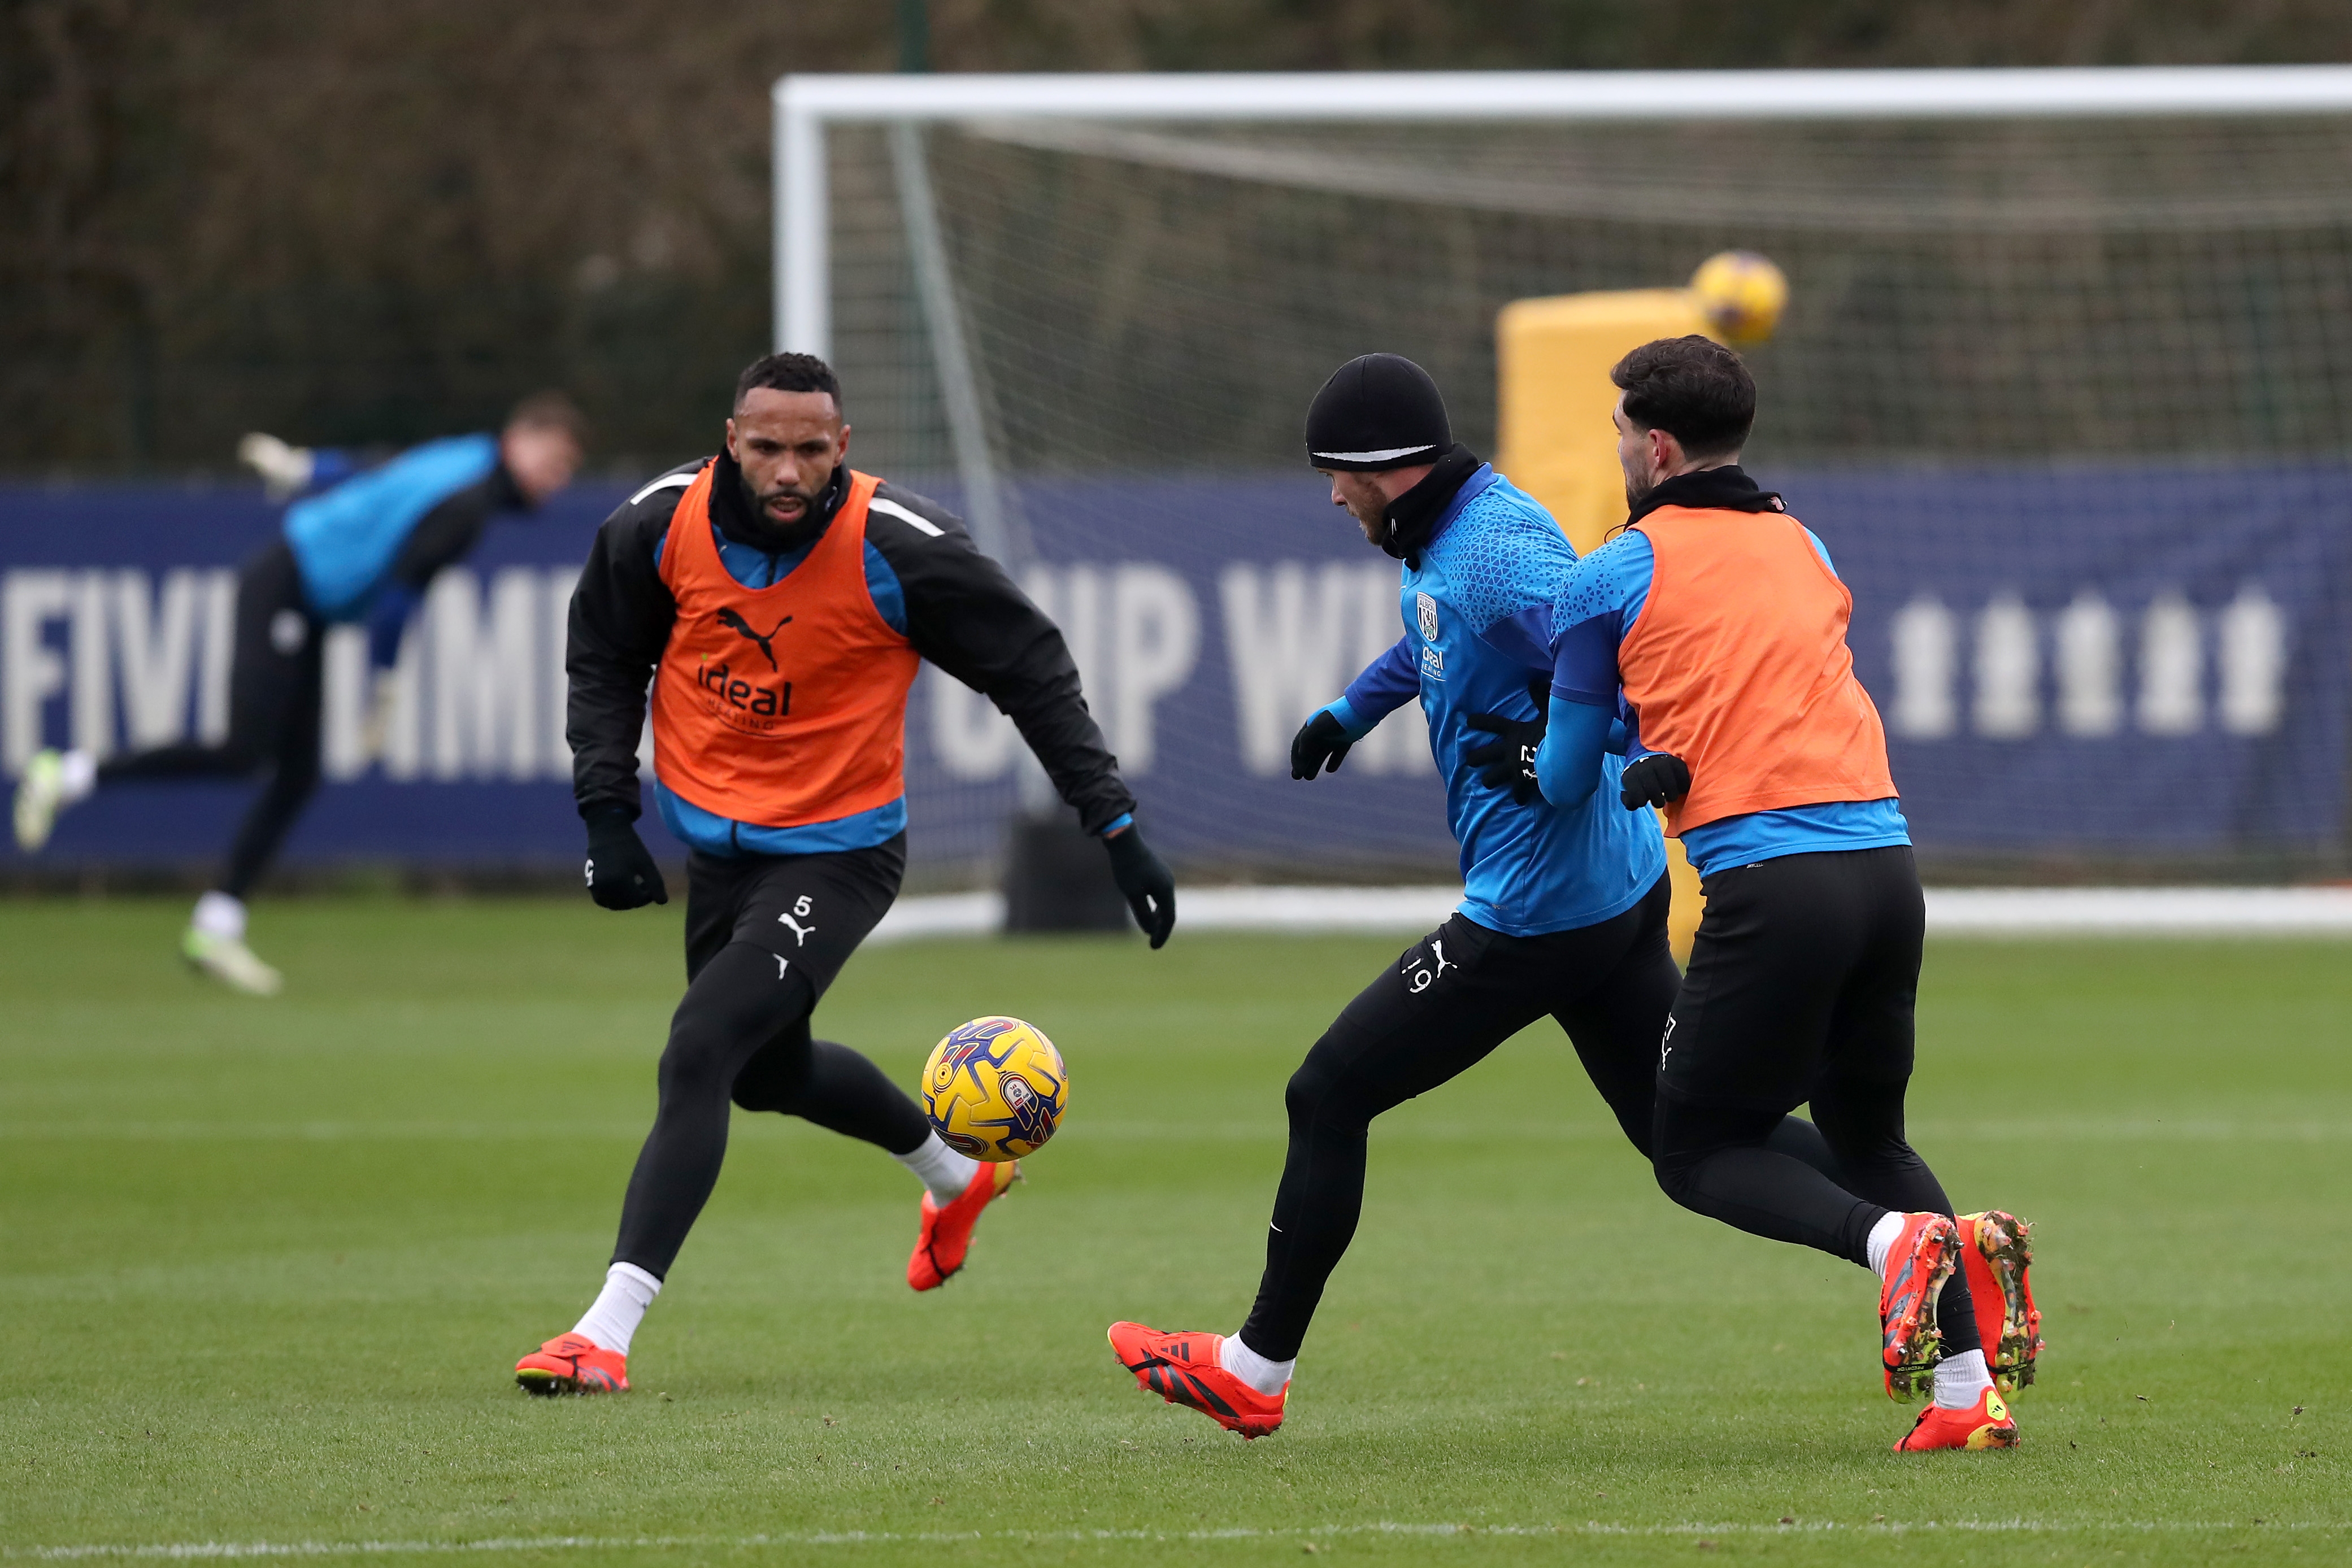 Albion players in training ahead of the clash with Blackburn Rovers.